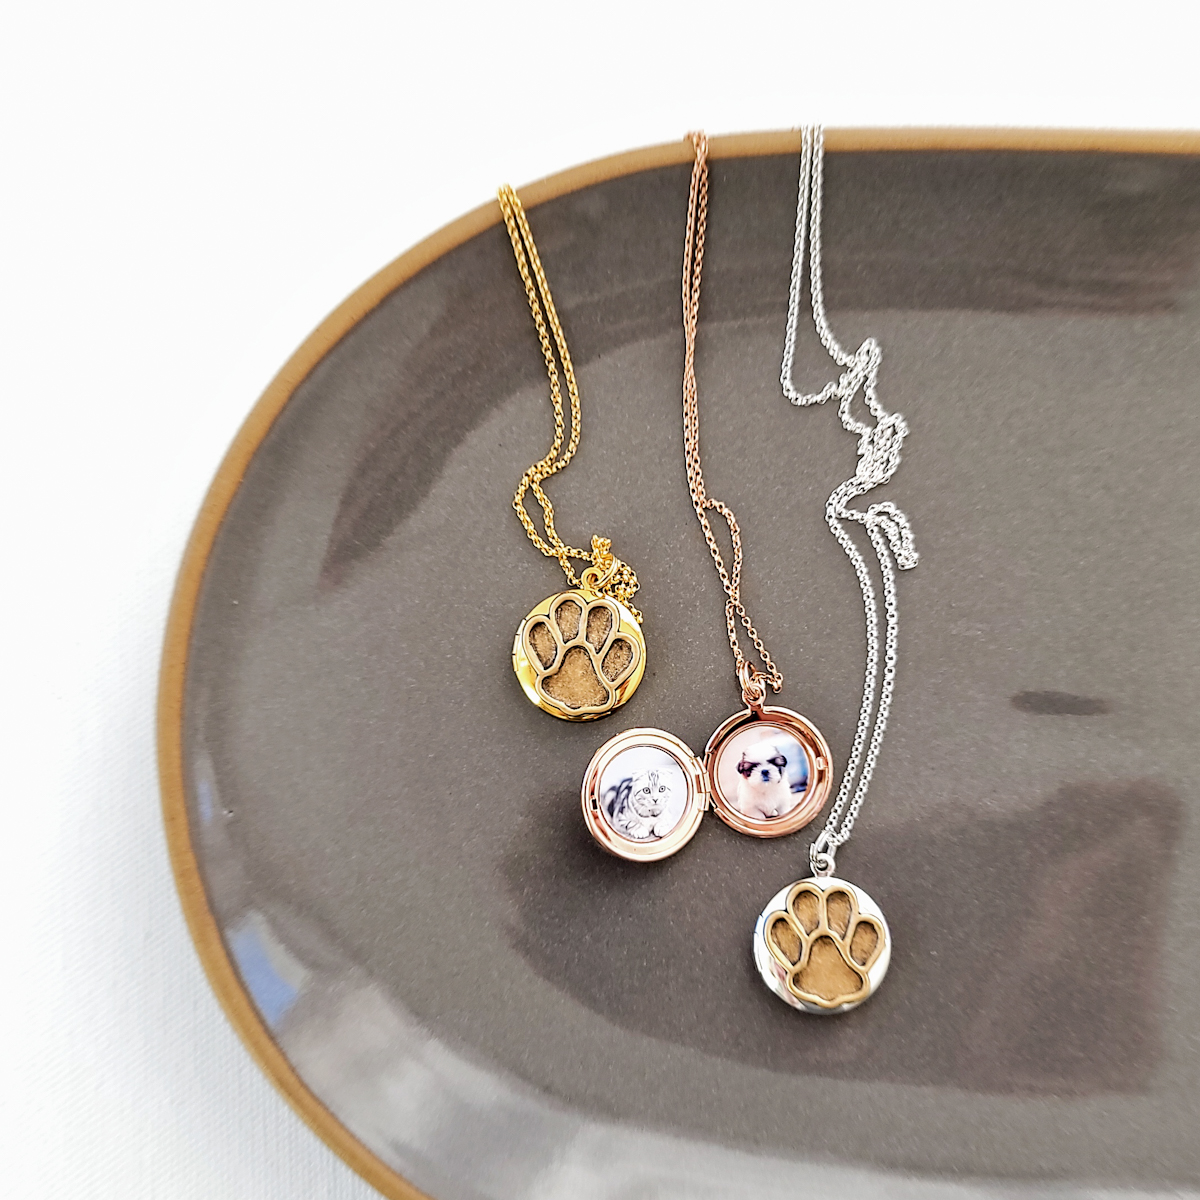 How to Print and Put a Picture in a Locket Pendant